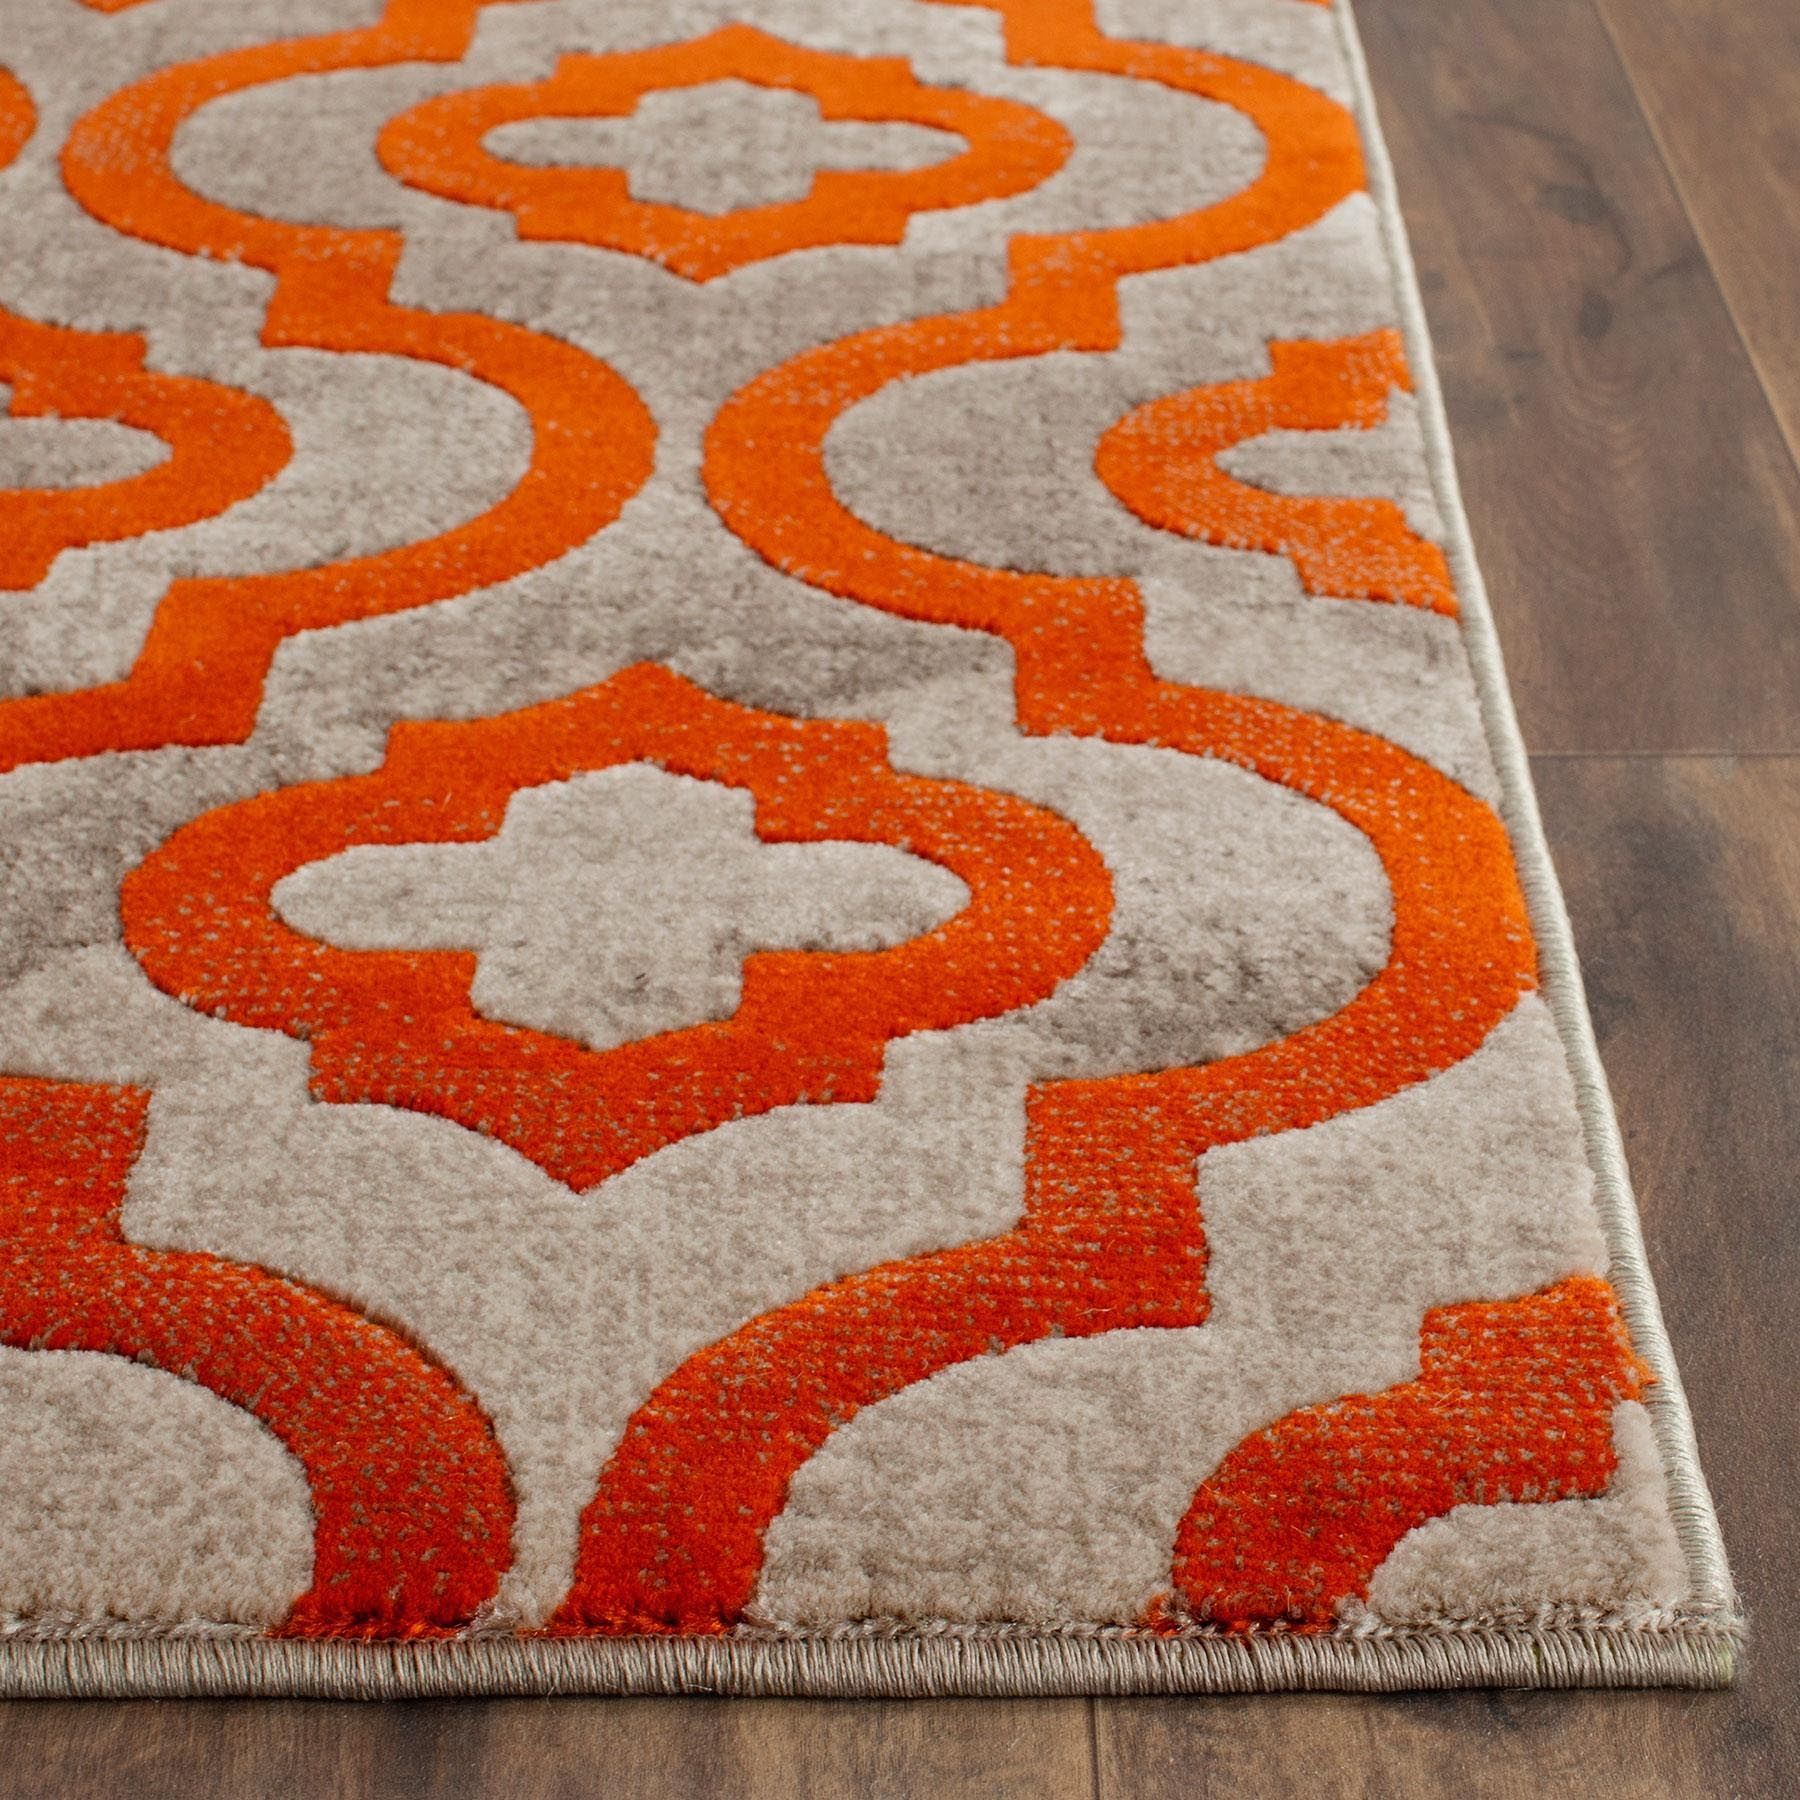 Area Rugs Awesome Orange And Teal Area Rug Orange Area Rug 5×8 Intended For Orange Floor Rugs (View 6 of 15)